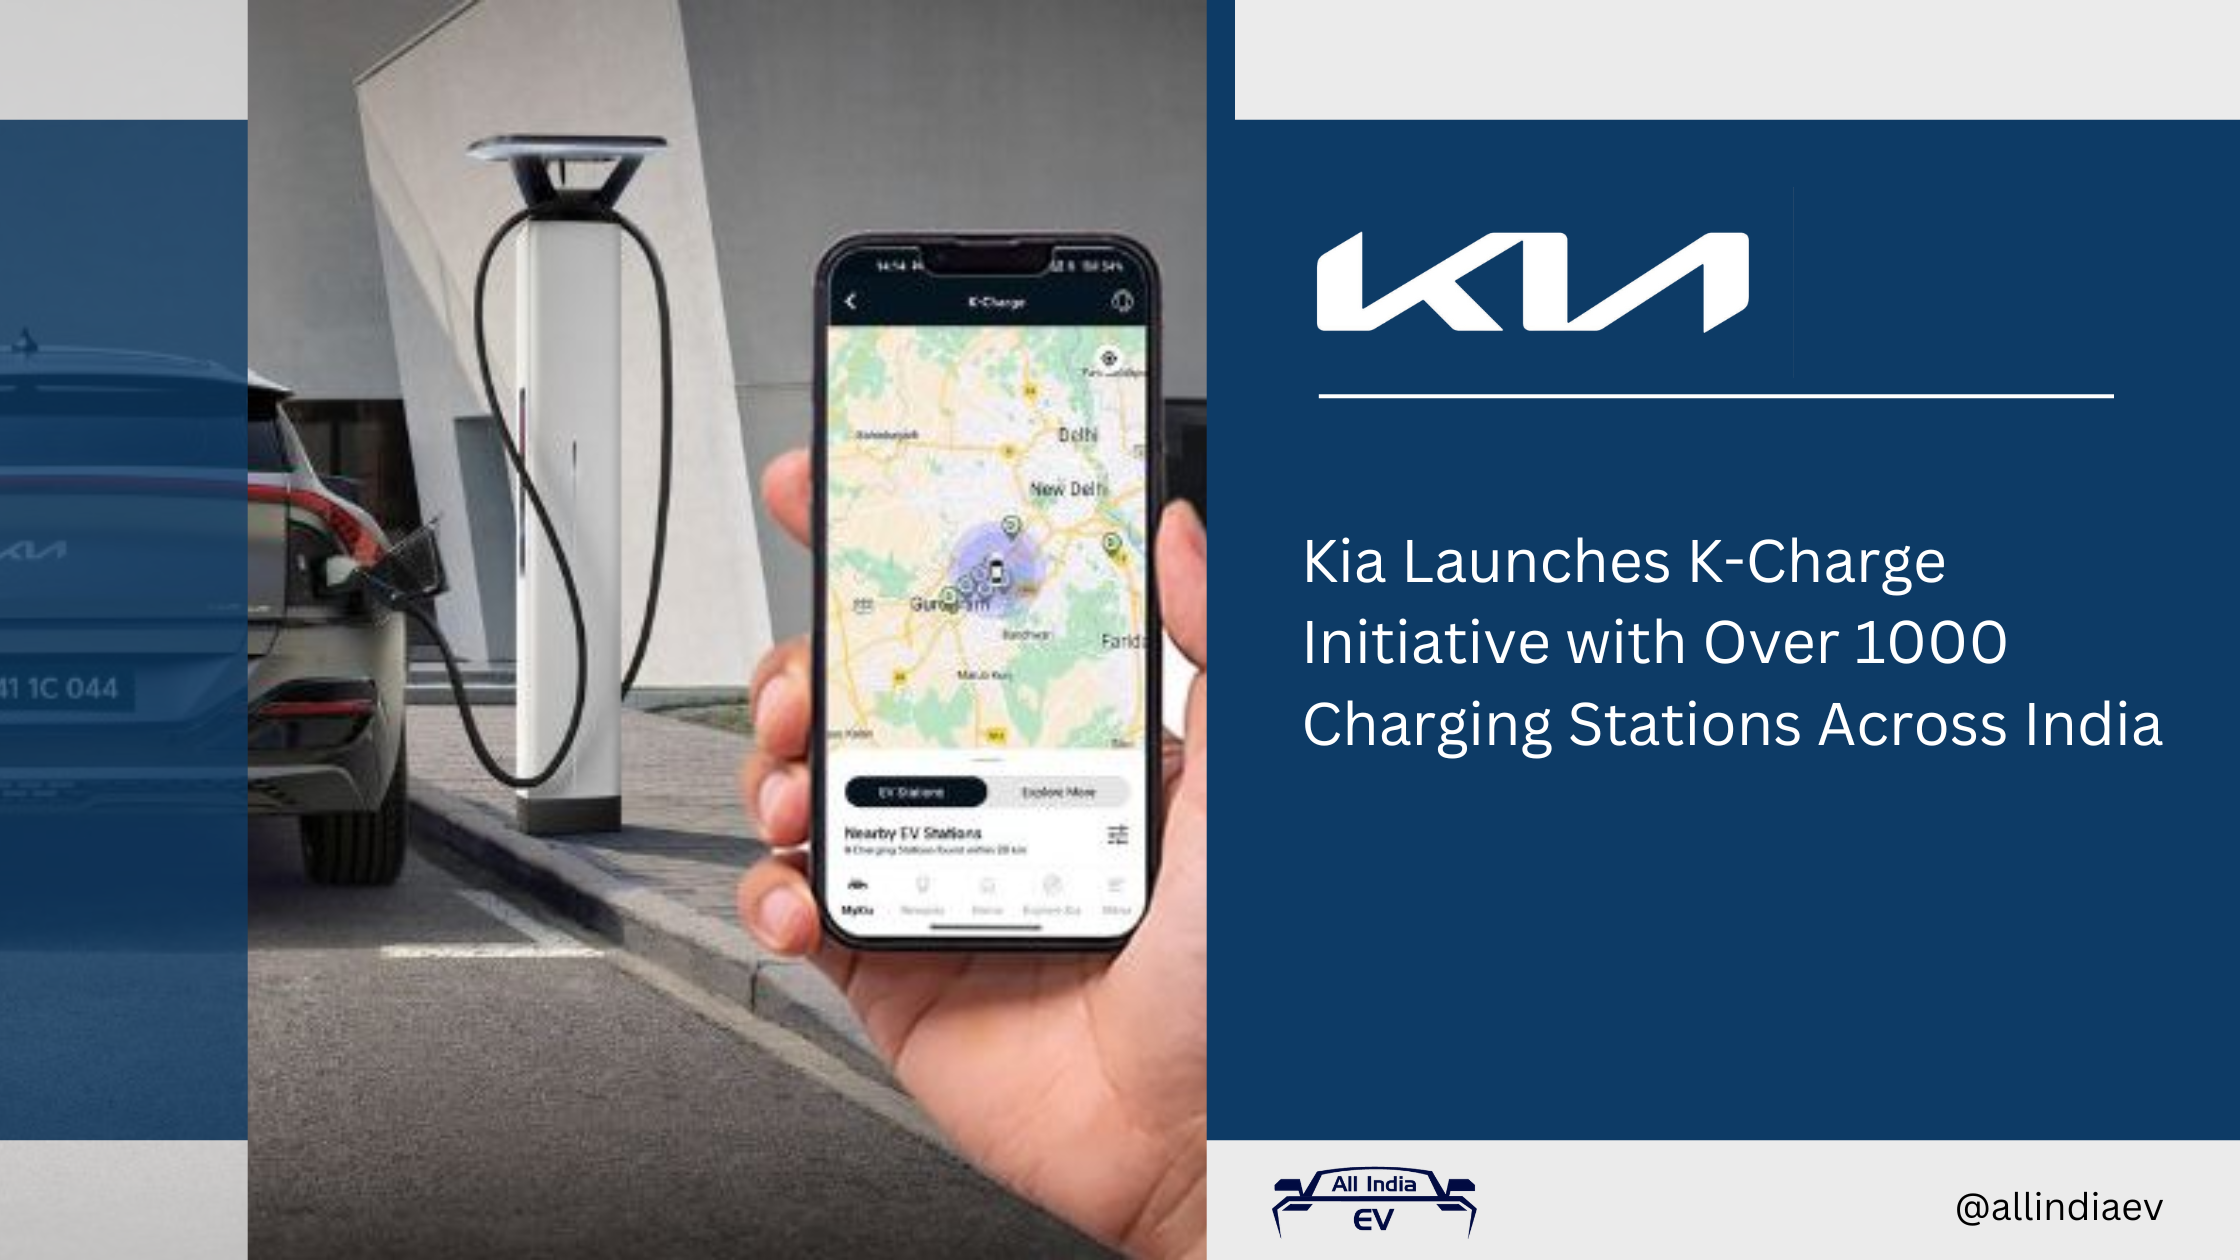 Kia Launches K-Charge Initiative with Over 1000 Charging Stations Across India